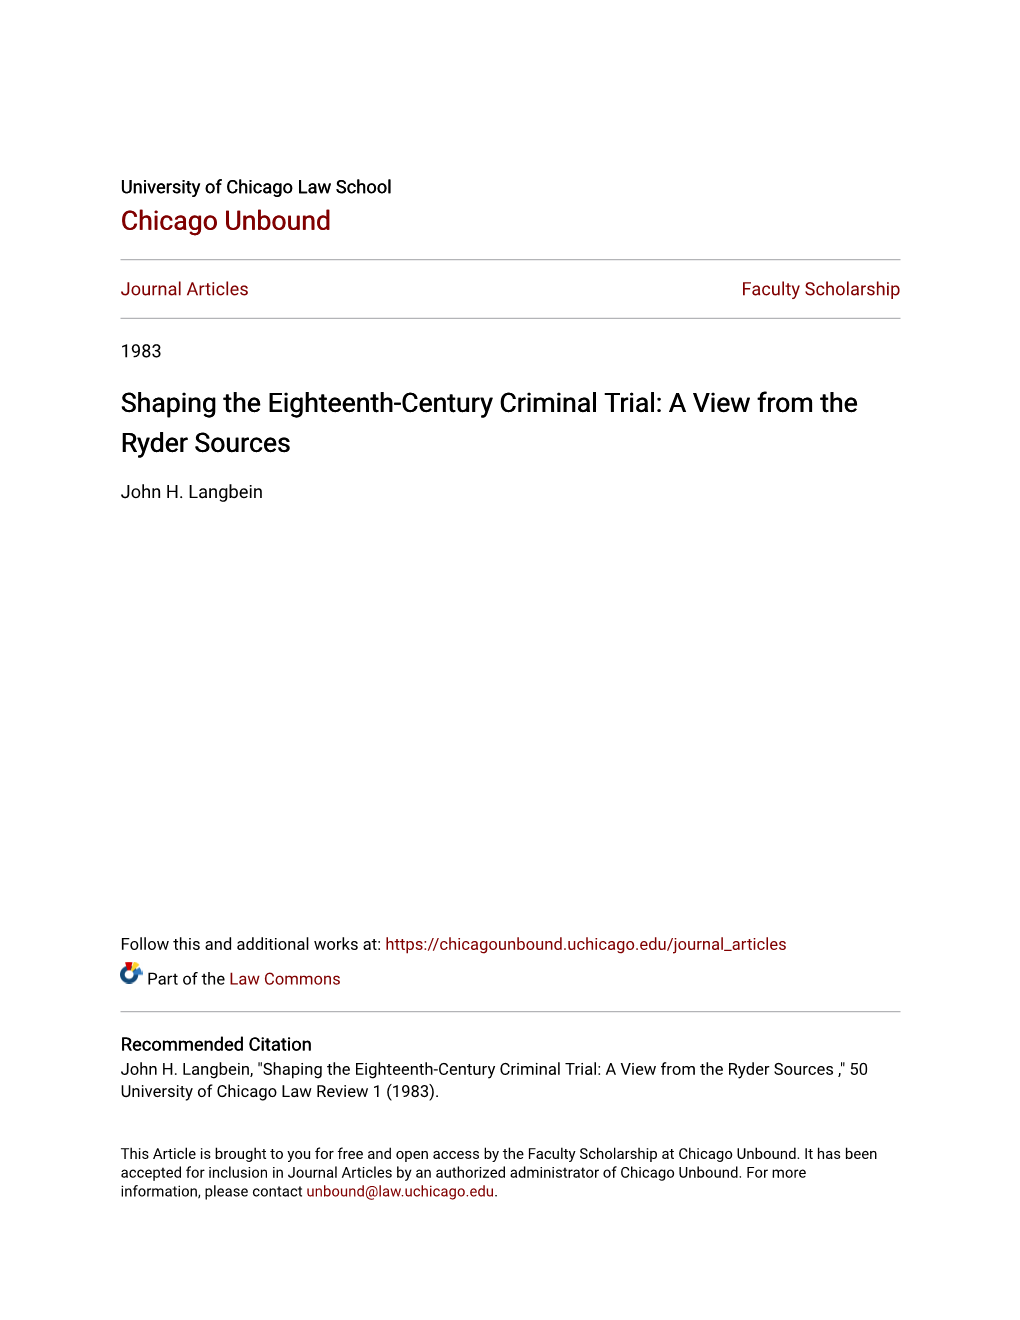 Shaping the Eighteenth-Century Criminal Trial: a View from the Ryder Sources